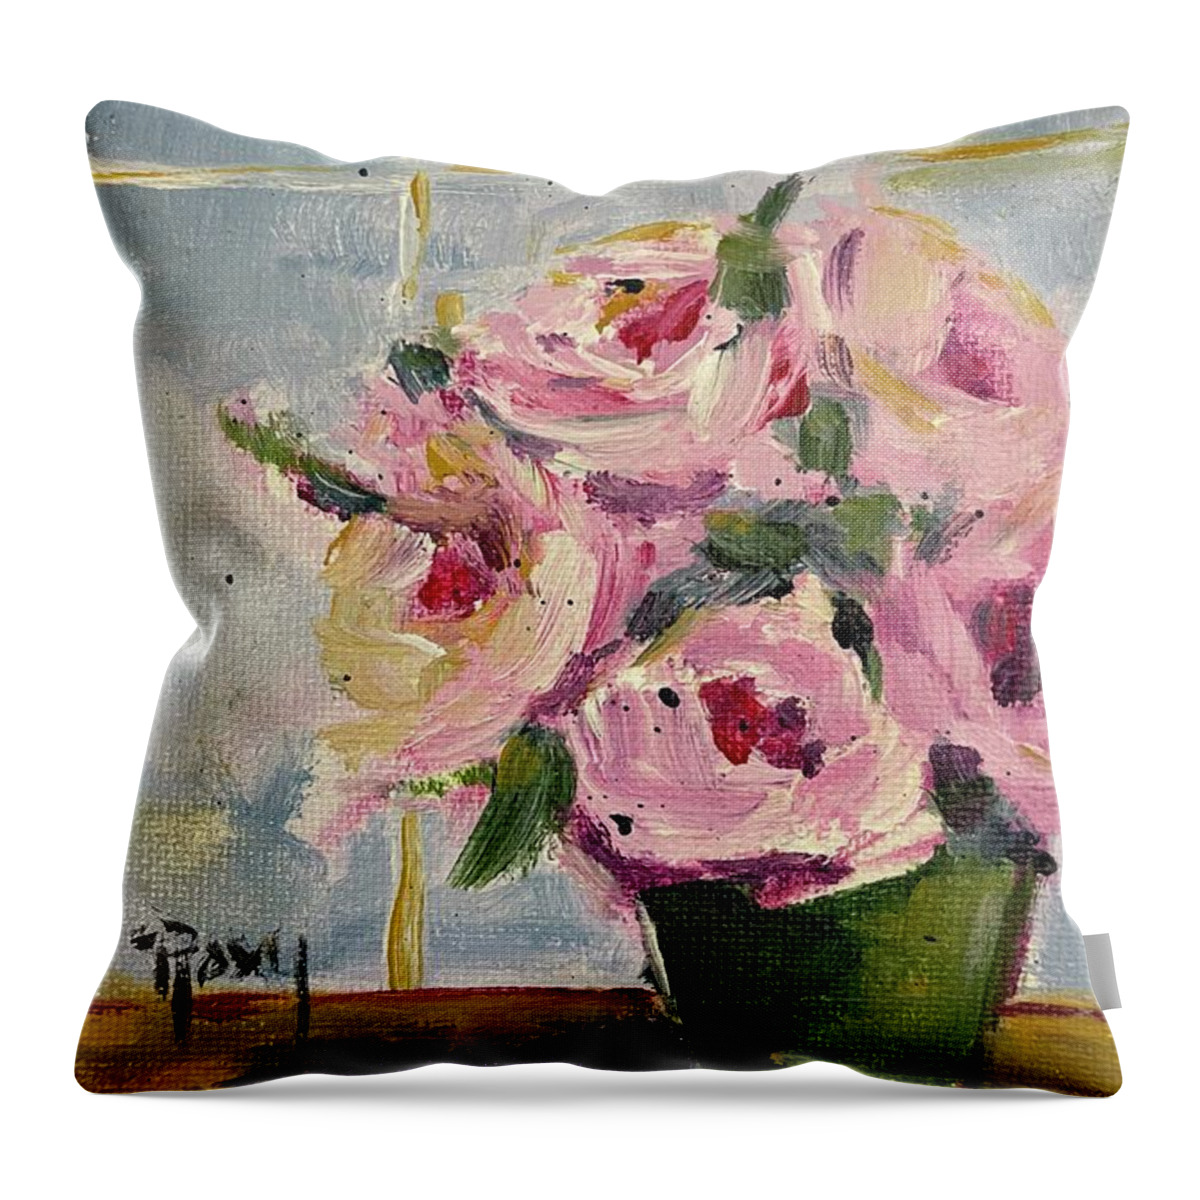 Pink Roses Throw Pillow featuring the painting Pink Roses by the Window by Roxy Rich